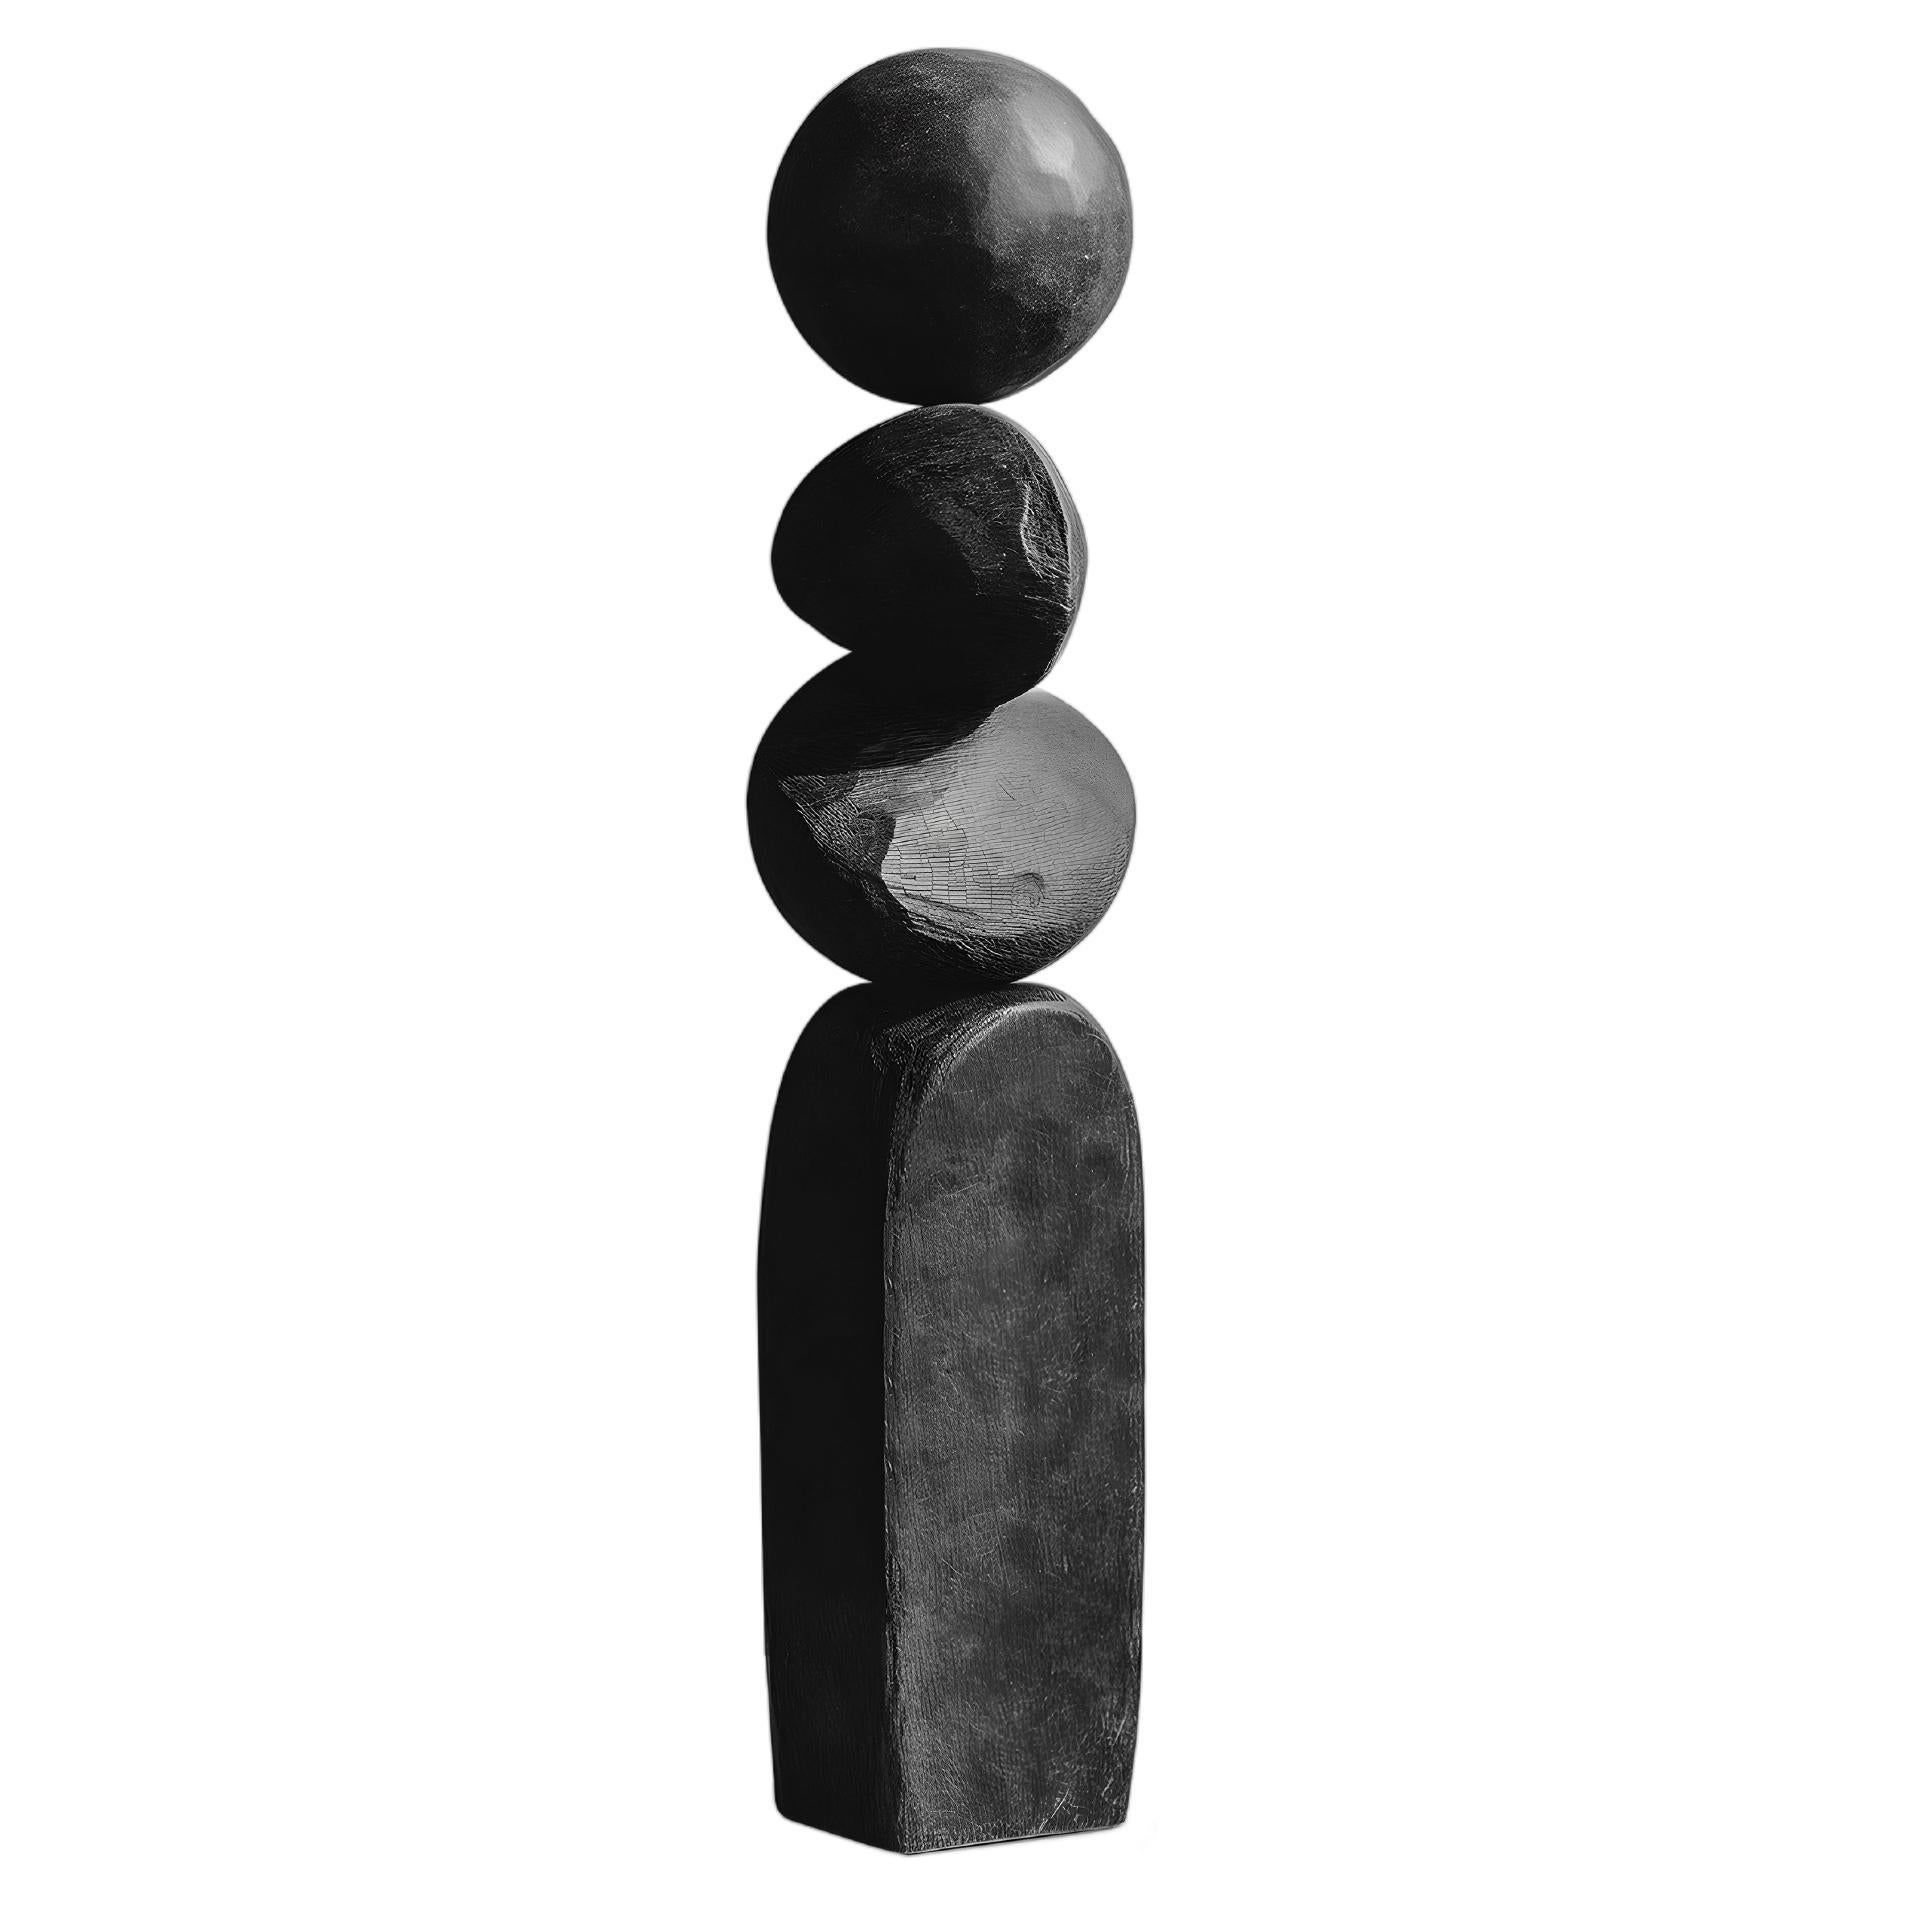 Abstract Beauty in Black Solid Wood, Escalona's Work, Still Stand No79